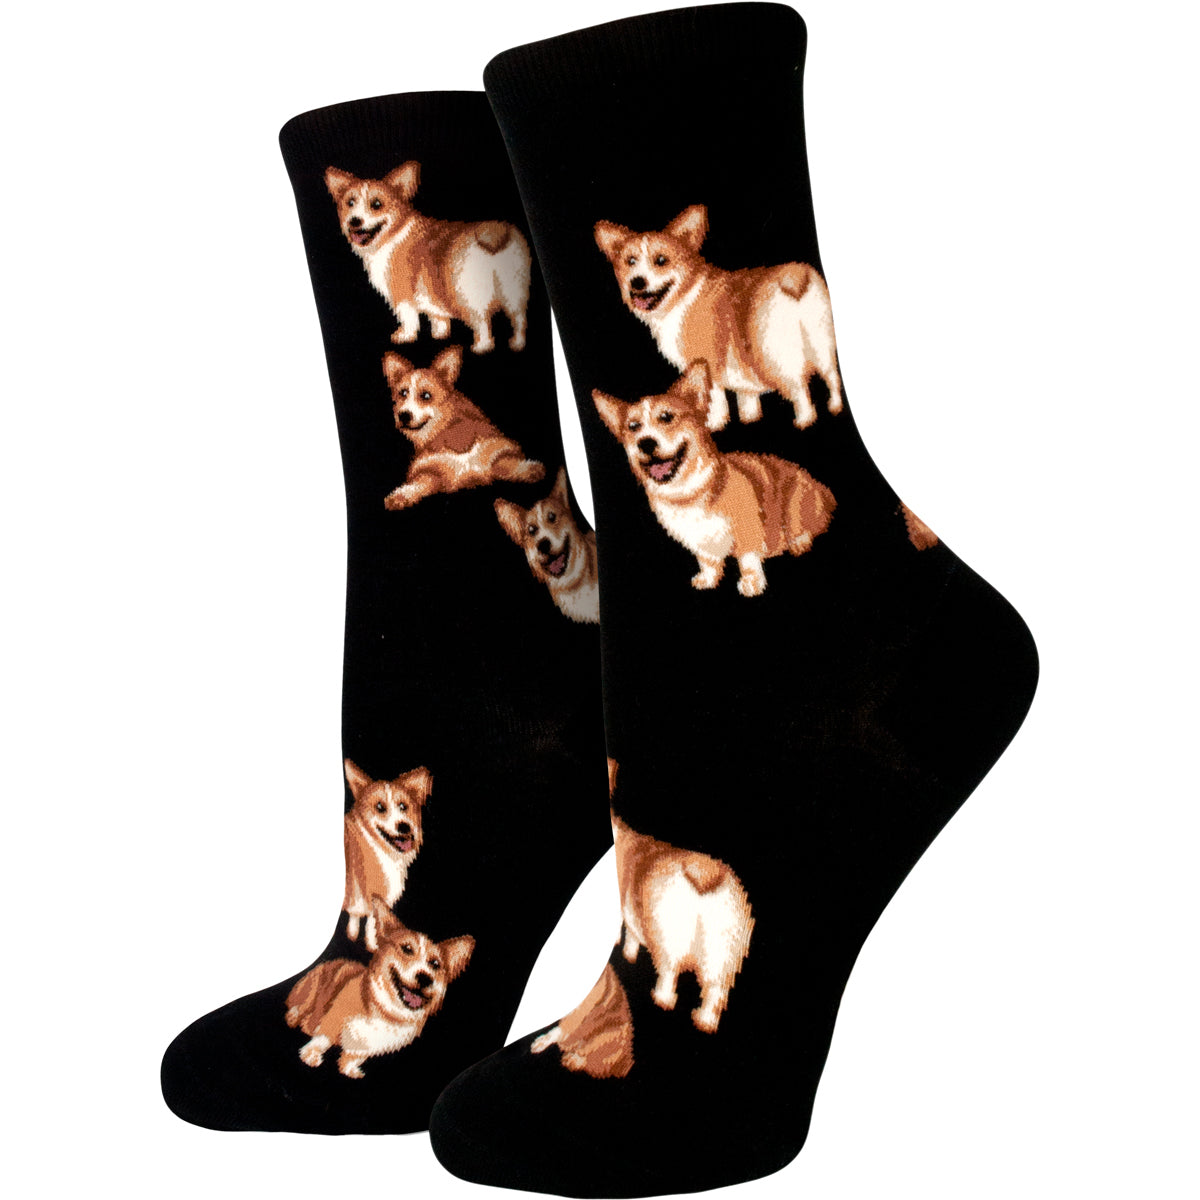 Corgi socks for dog lovers are patterned with cute corgi dogs showing their fluffy heart-shaped butts on a black background and are part of our Dog Socks collection.